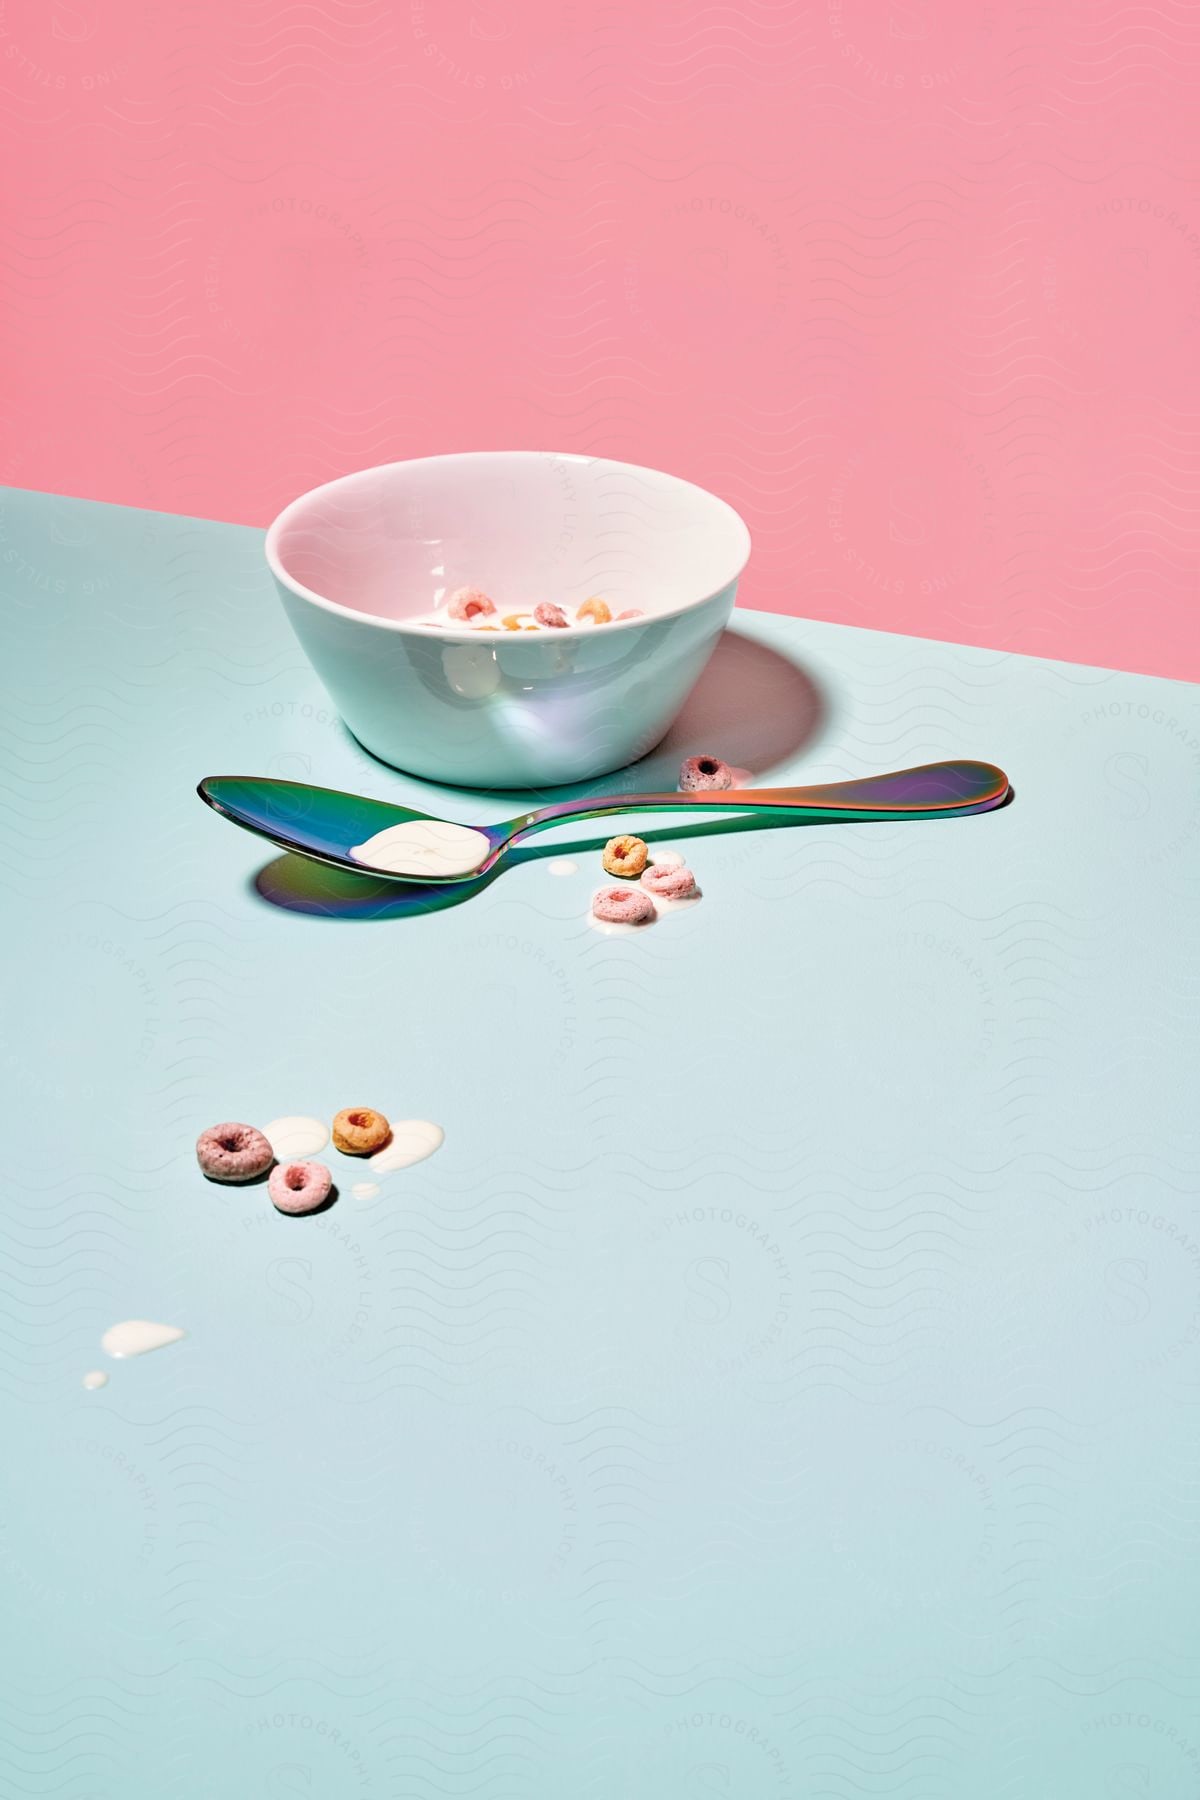 Spilled cheerios and milk next to a spoon and white bowl